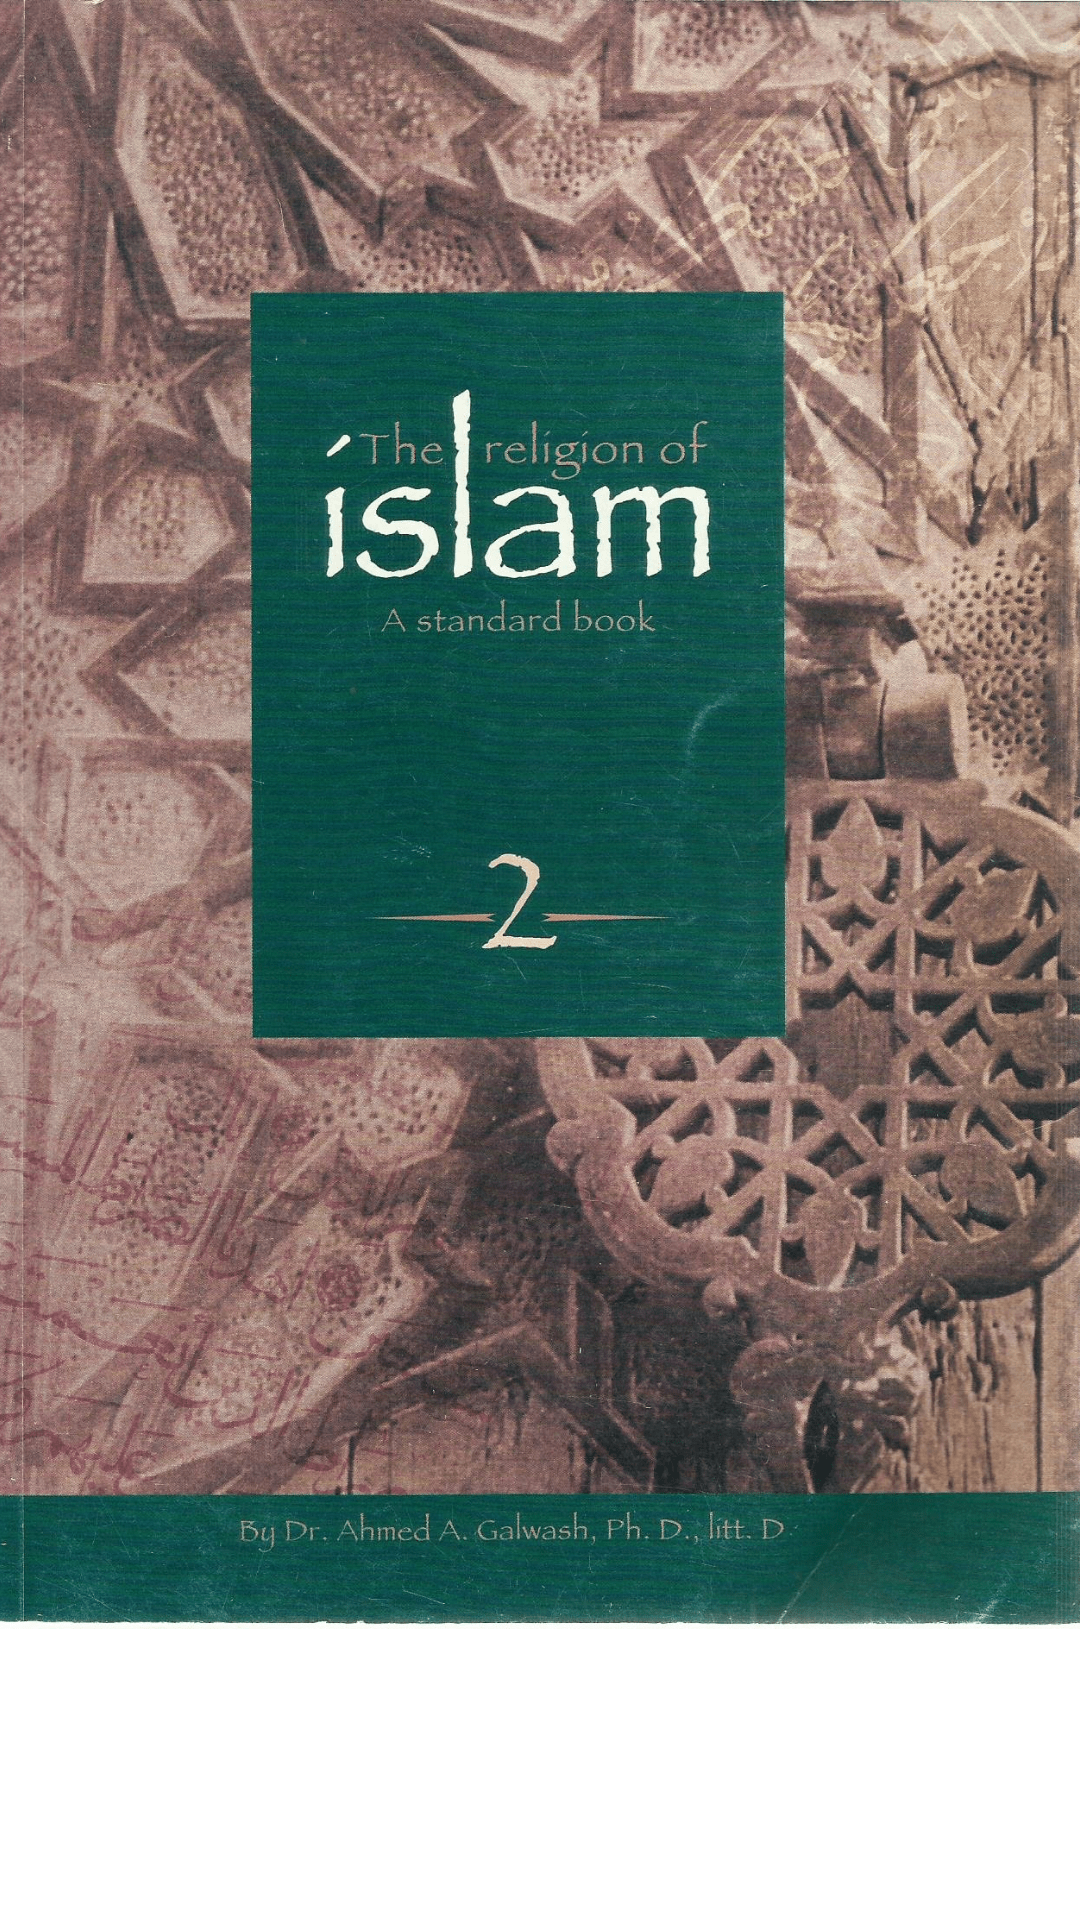 The Religion of Islam: A Standard book